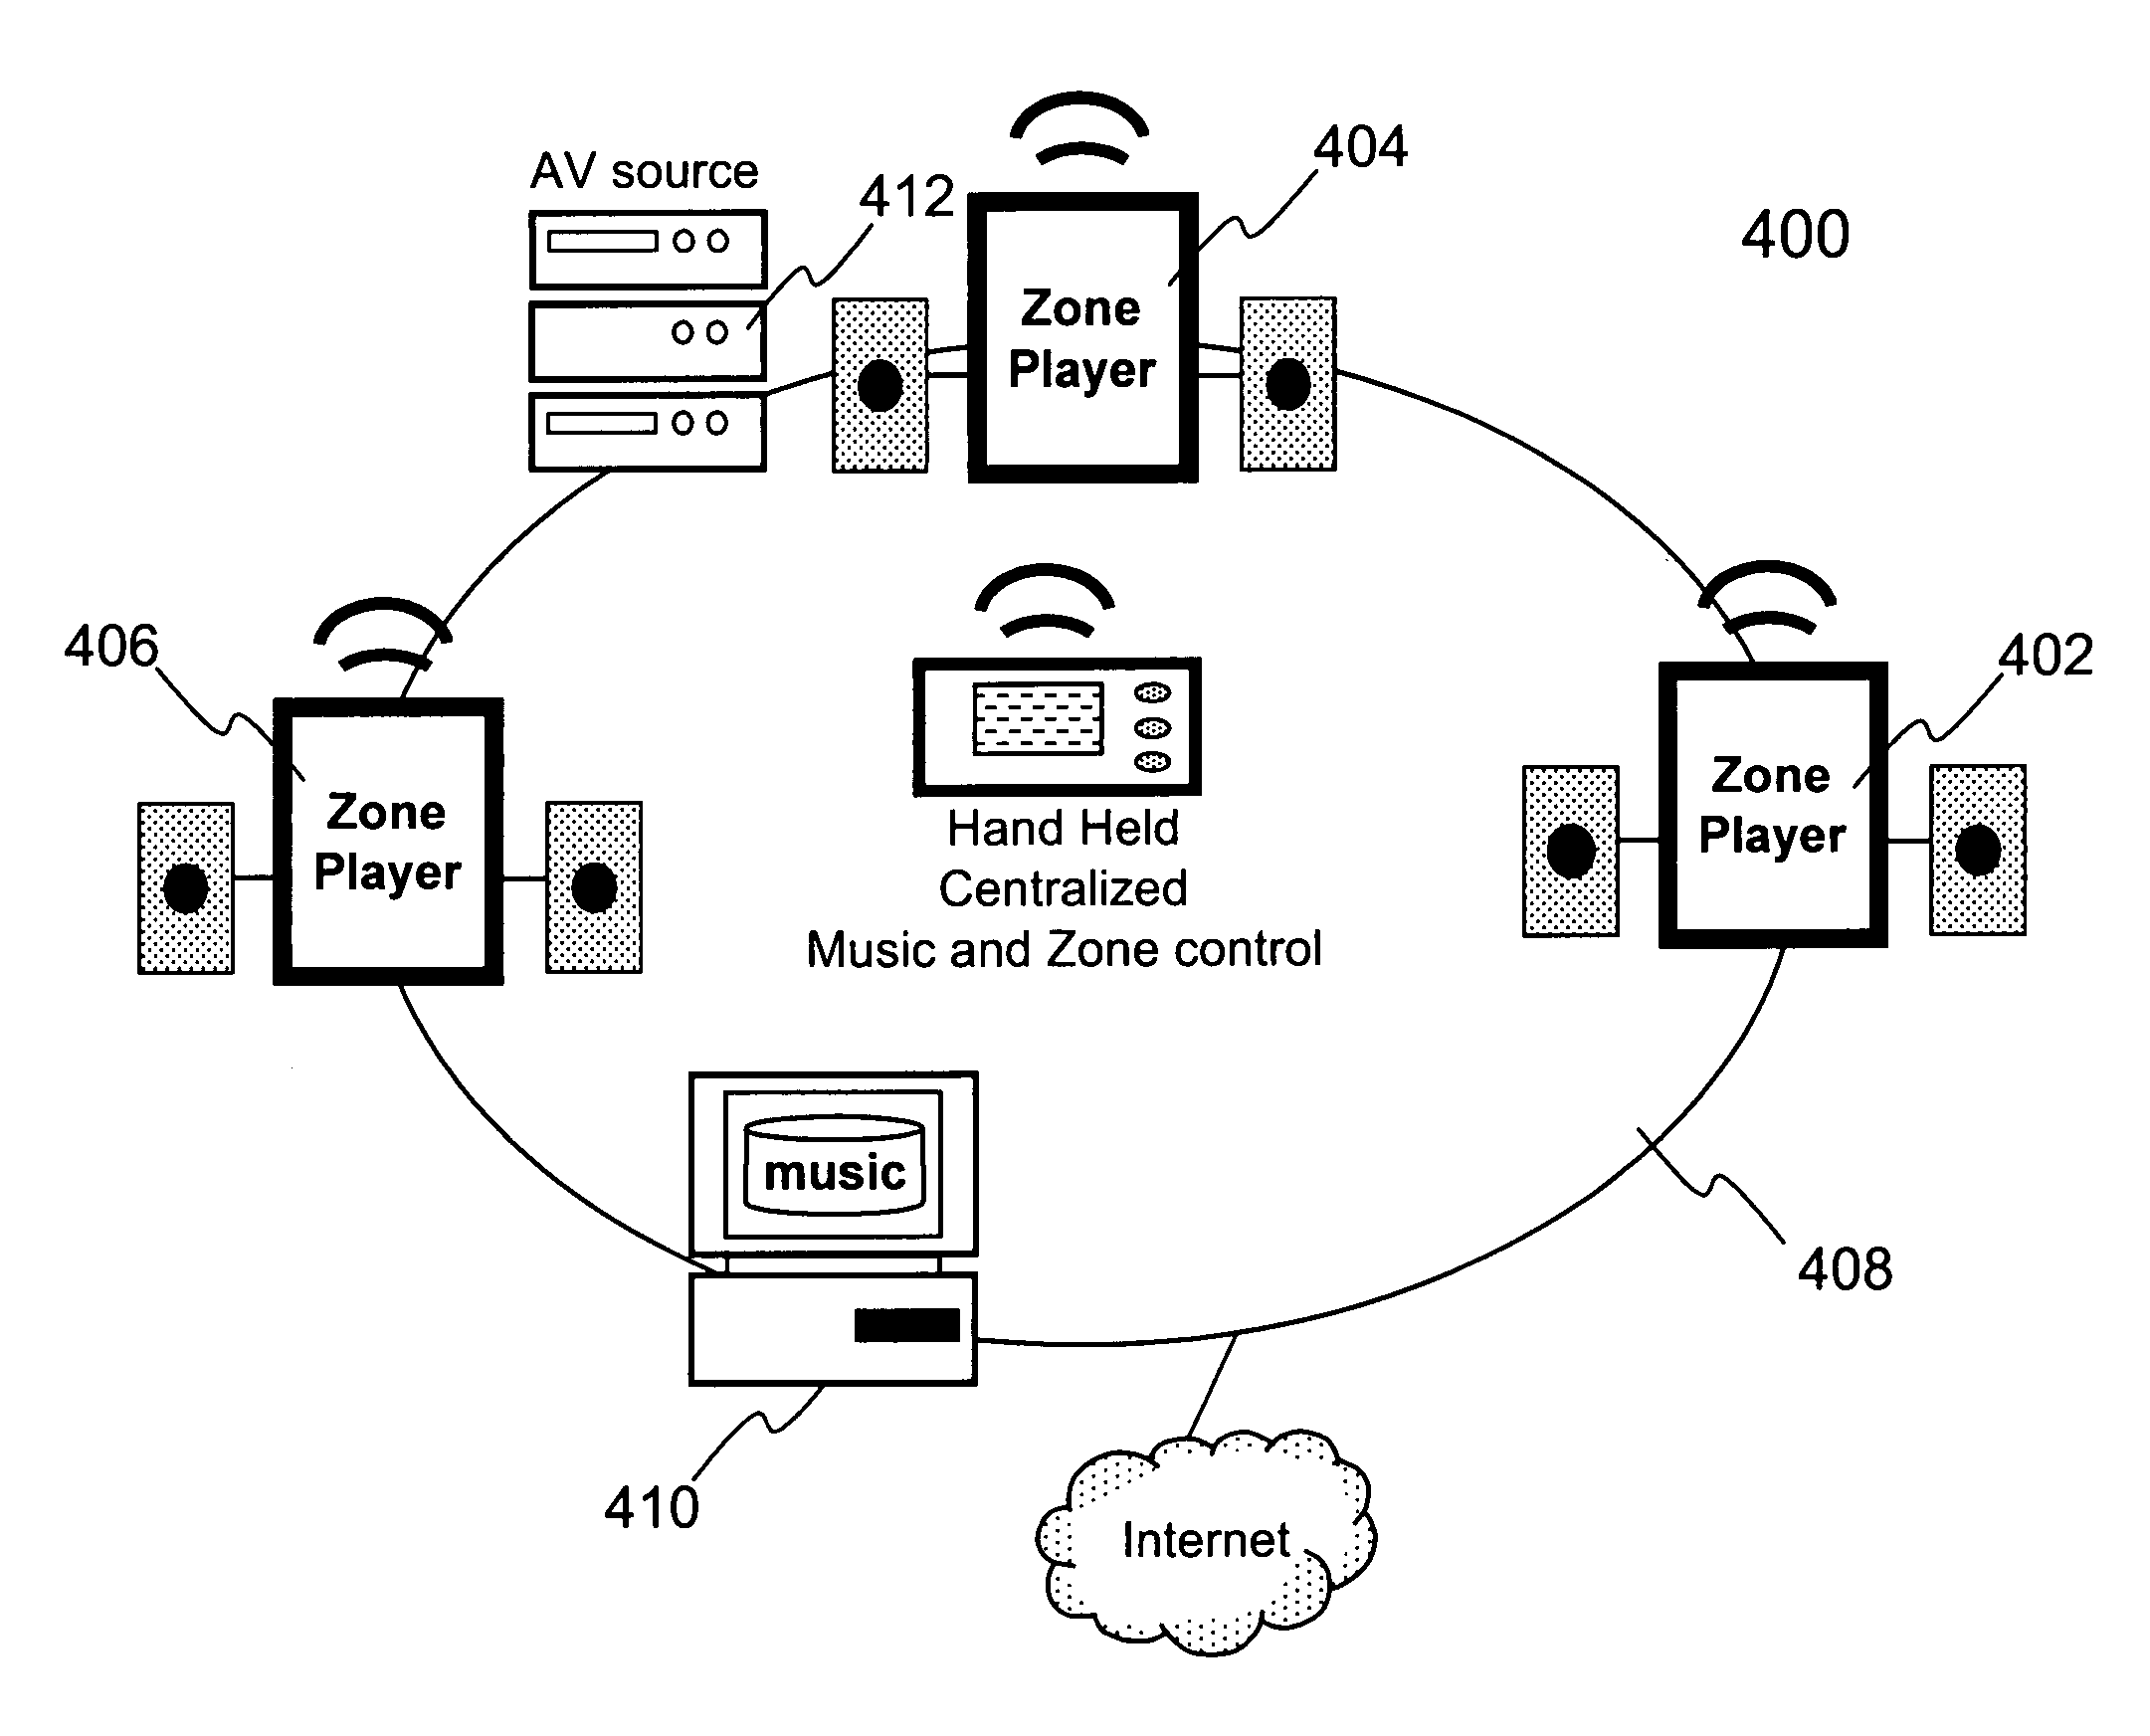 Method and apparatus for automatically enabling subwoofer channel audio based on detection of subwoofer device